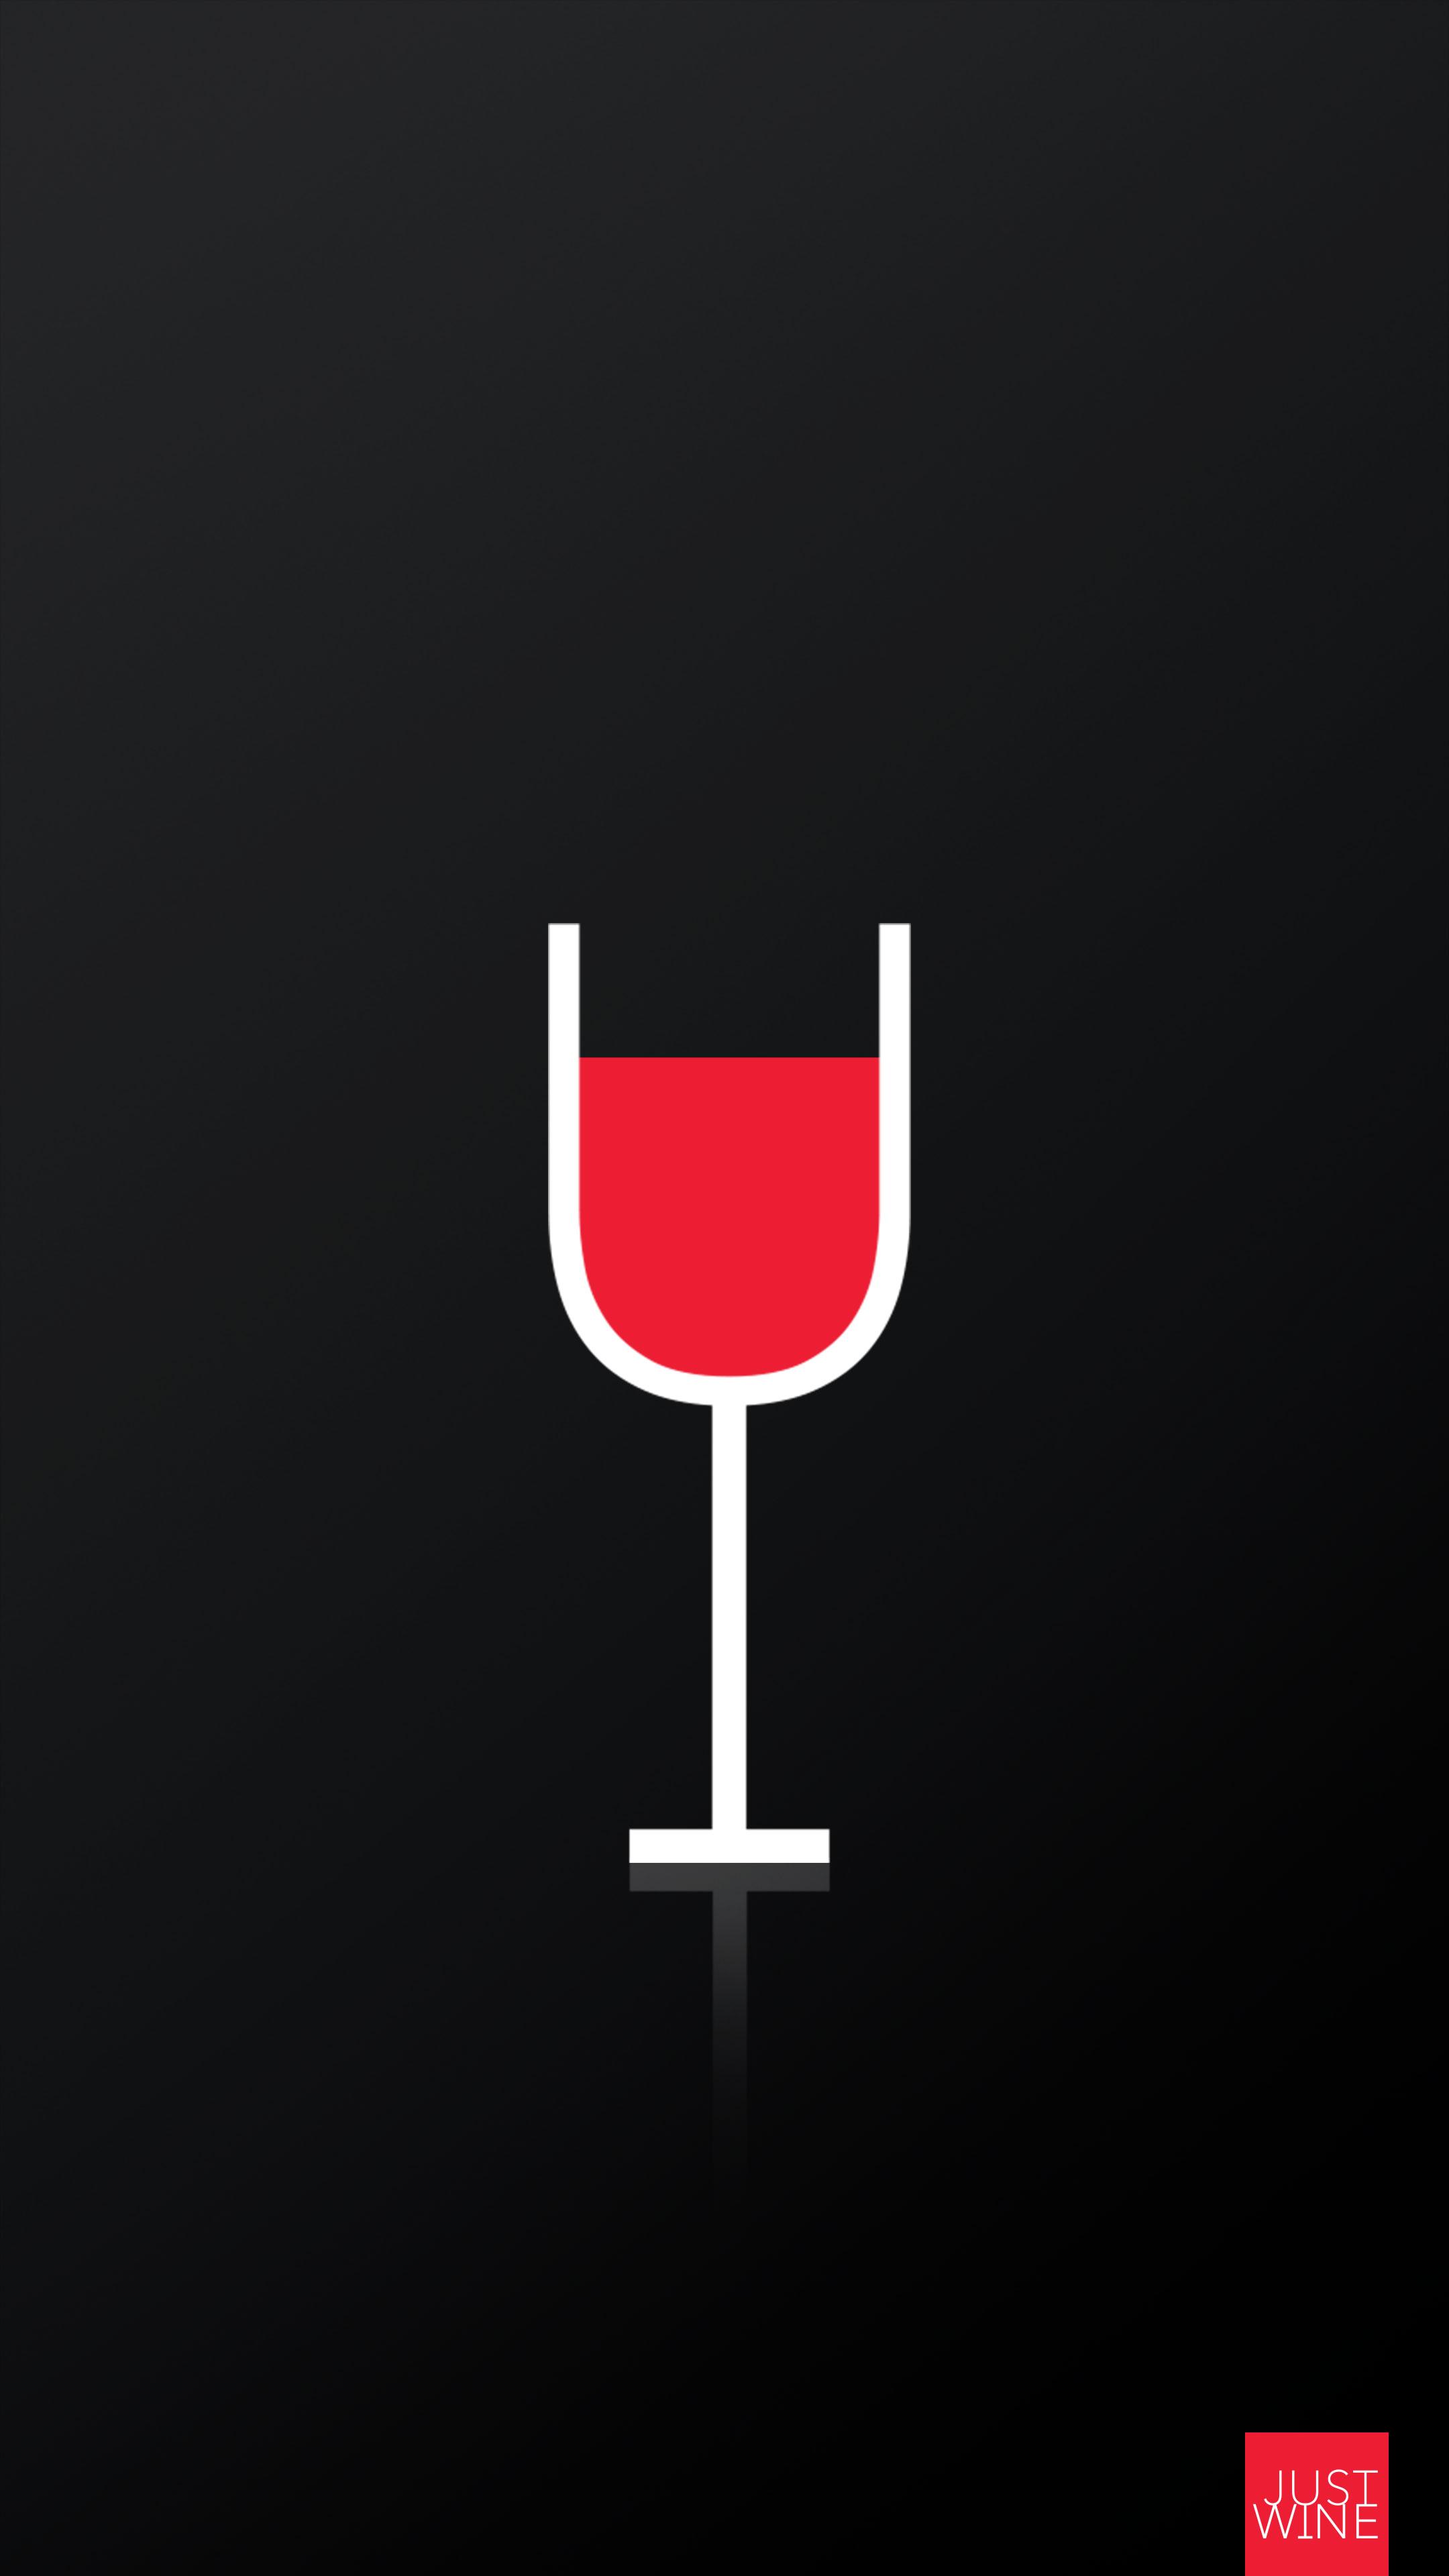 Wine Themed Background Wallpaper For IPhones A. Just